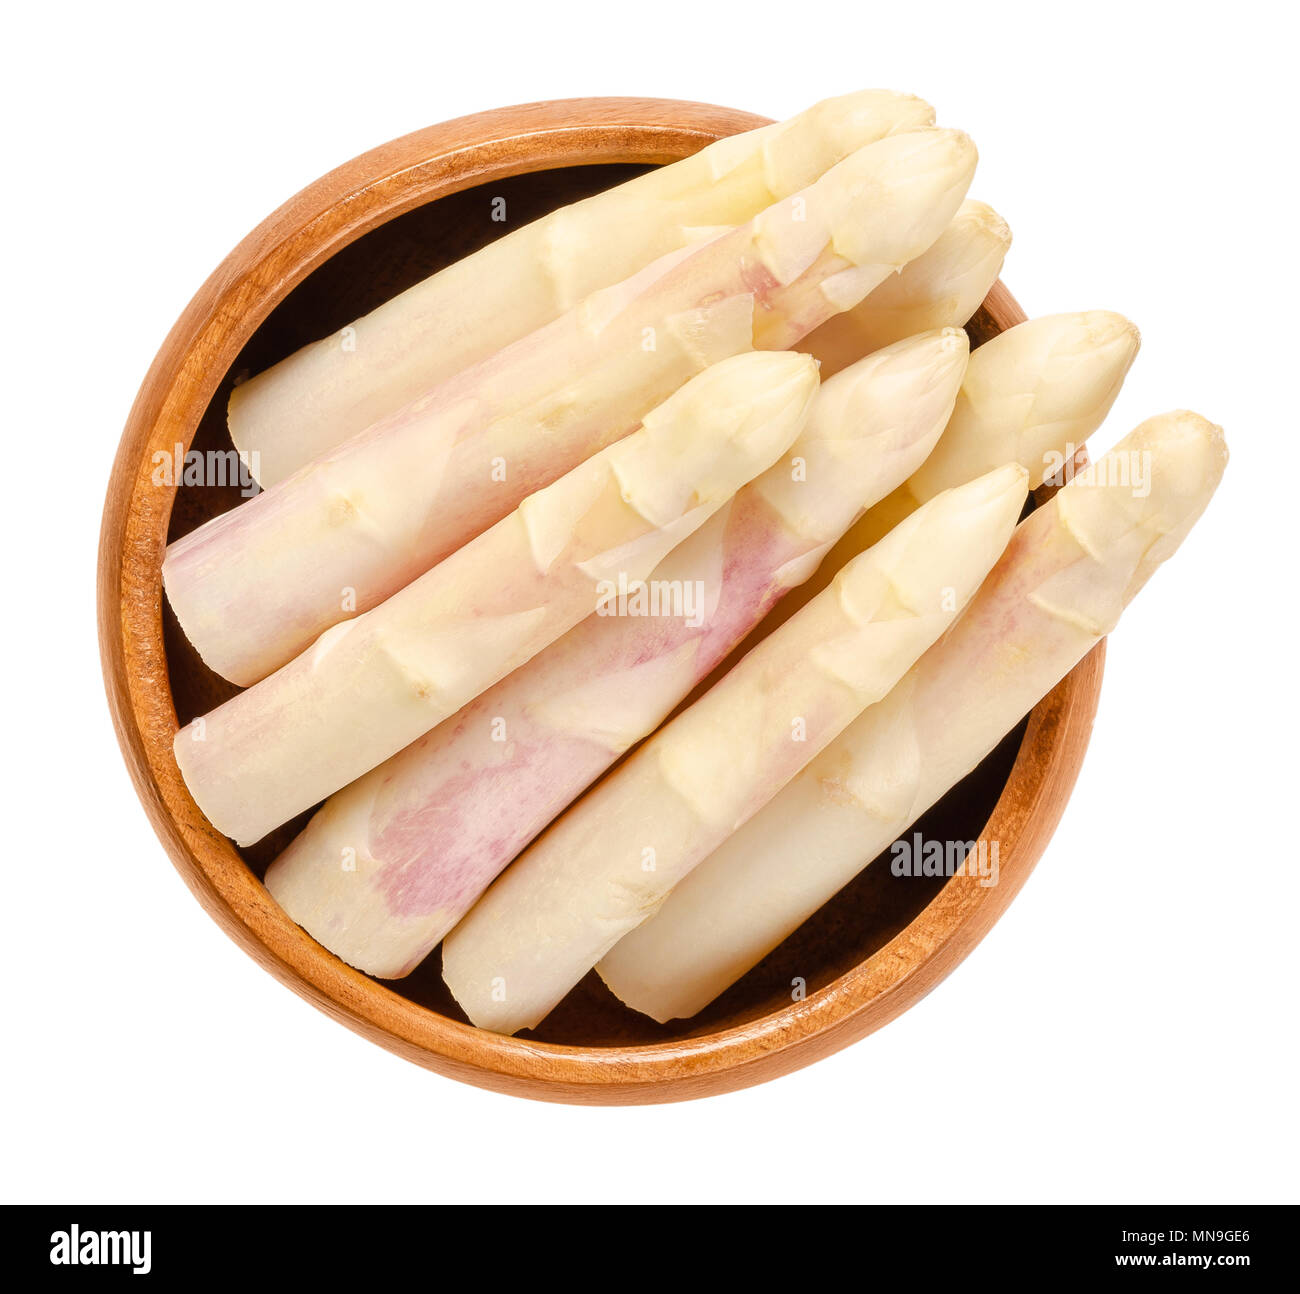 Raw white asparagus tips in wooden bowl. Blanched sparrow grass shoots. Cultivated Asparagus officinalis. Vegetable with thick stems and closed buds. Stock Photo